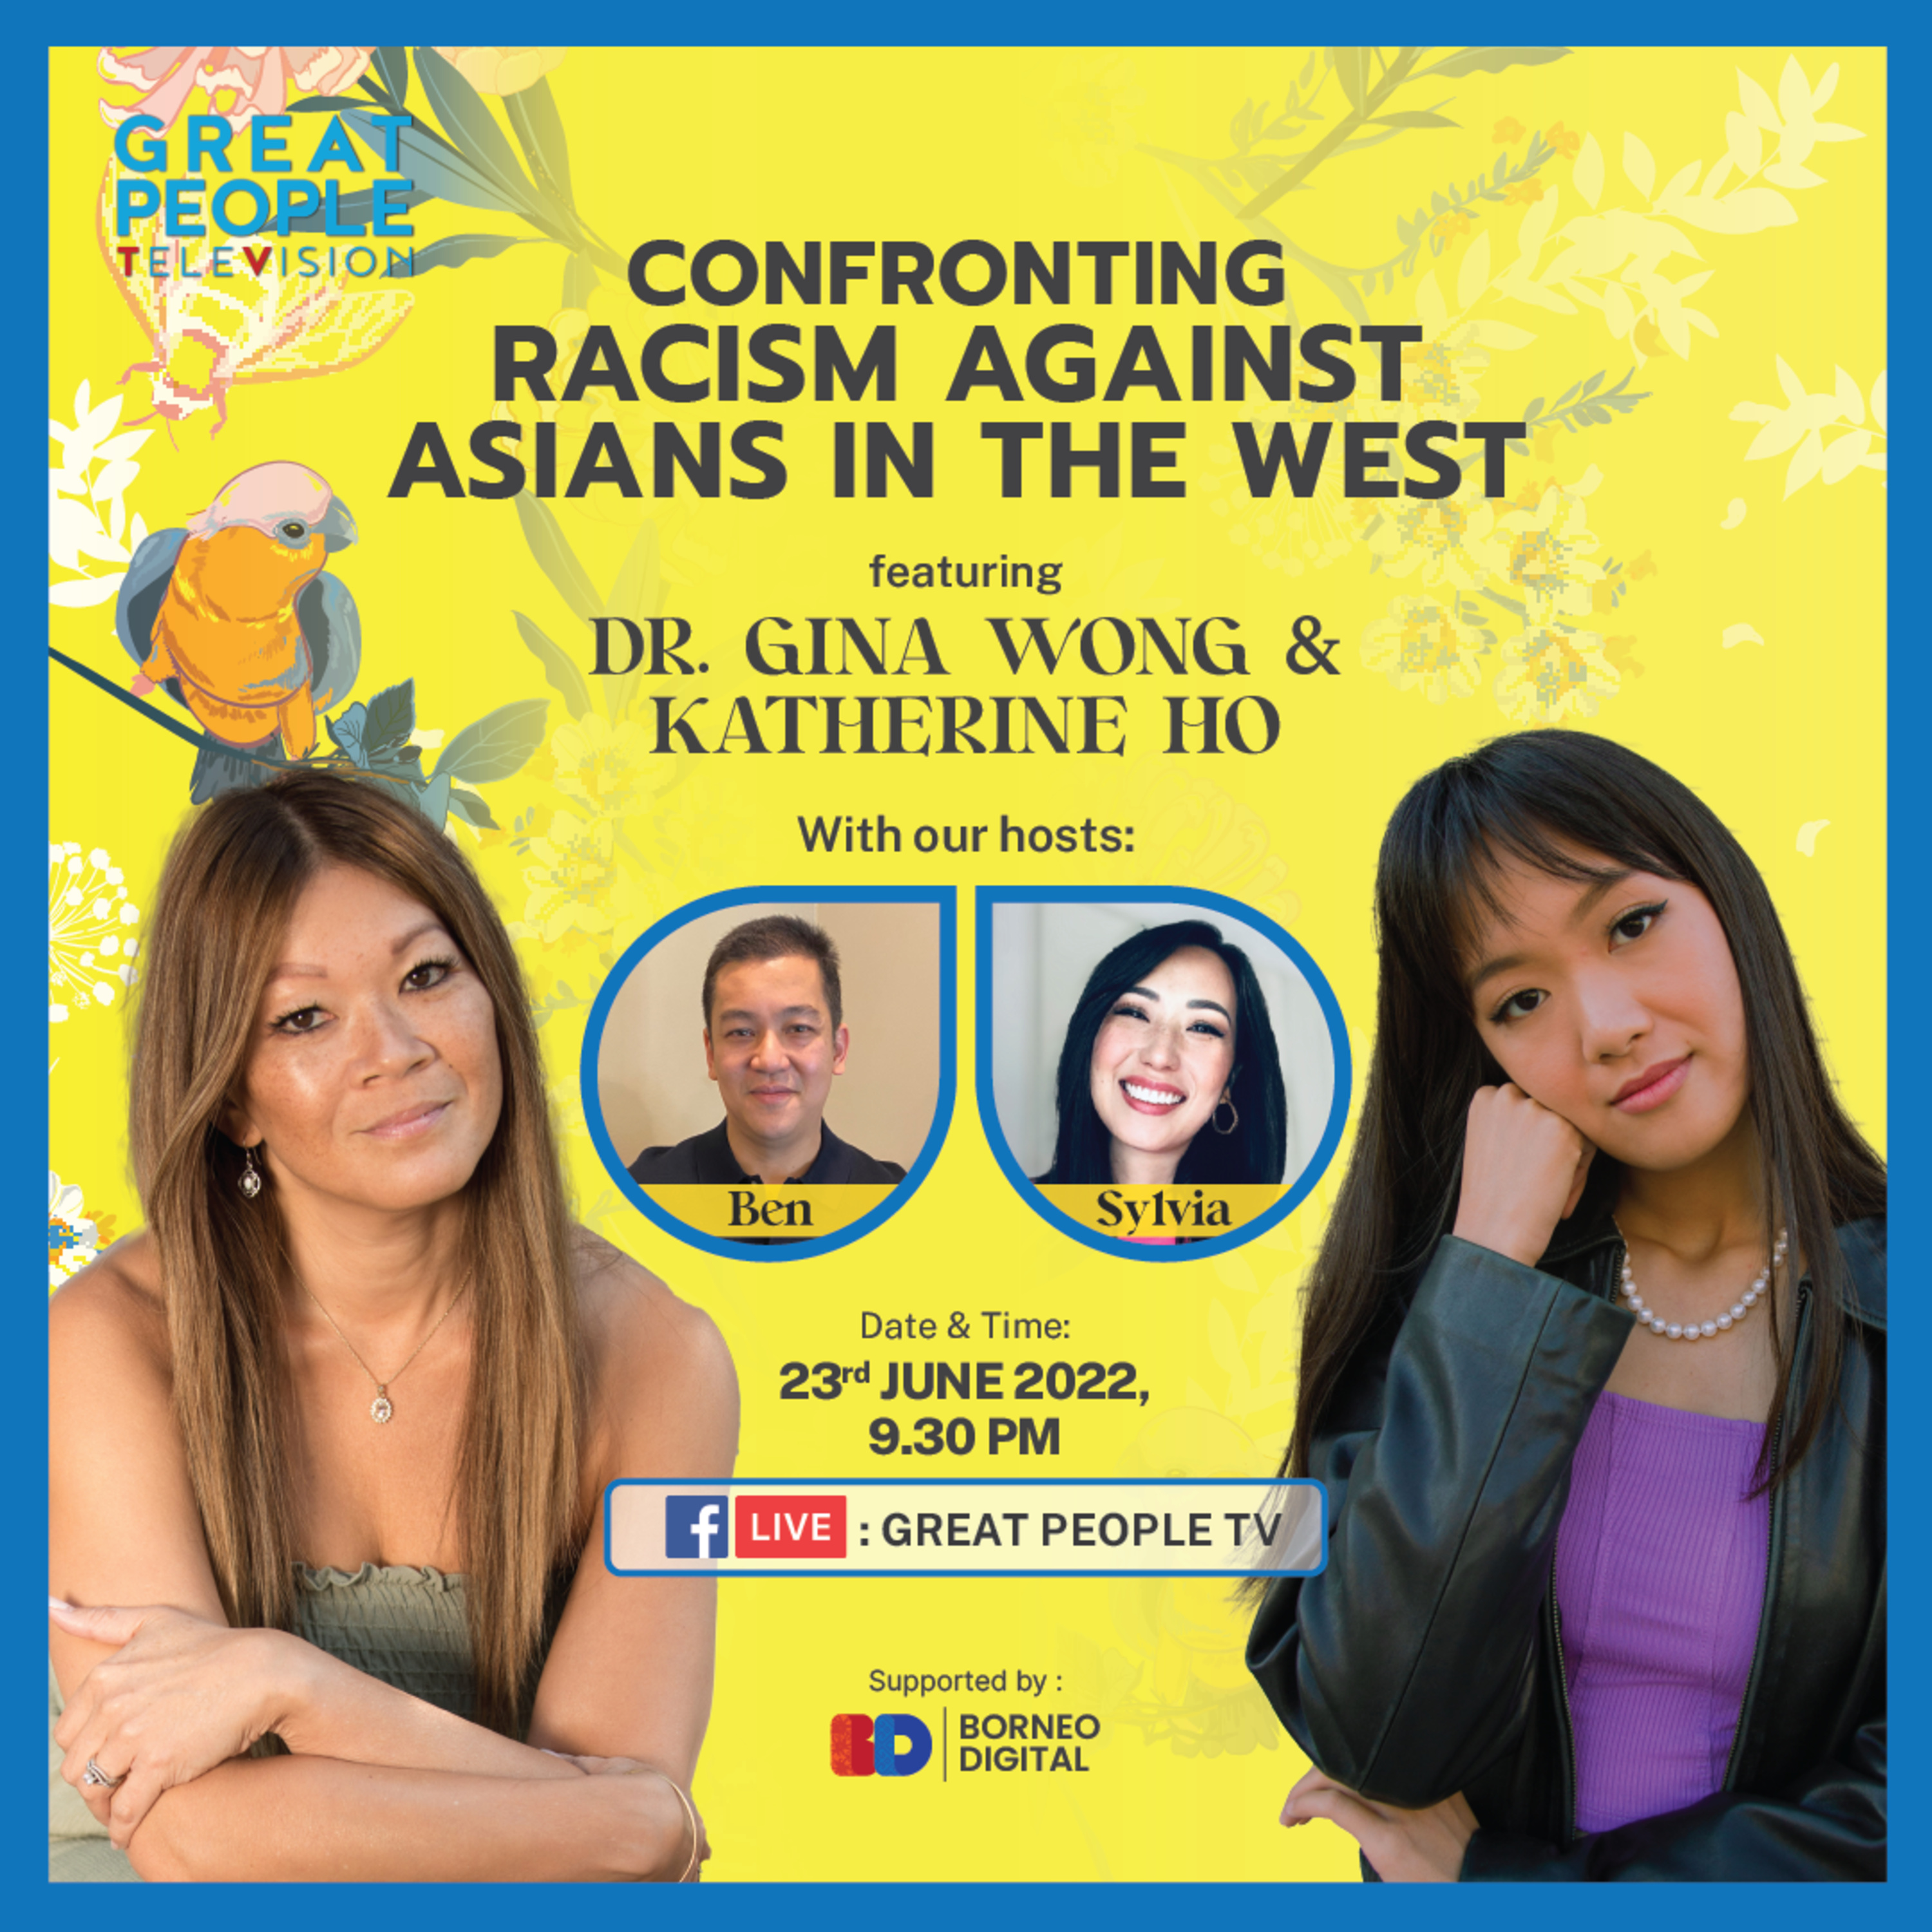 Confronting Racism Against Asians In The West - Dr. Gina Wong & Katherine Ho